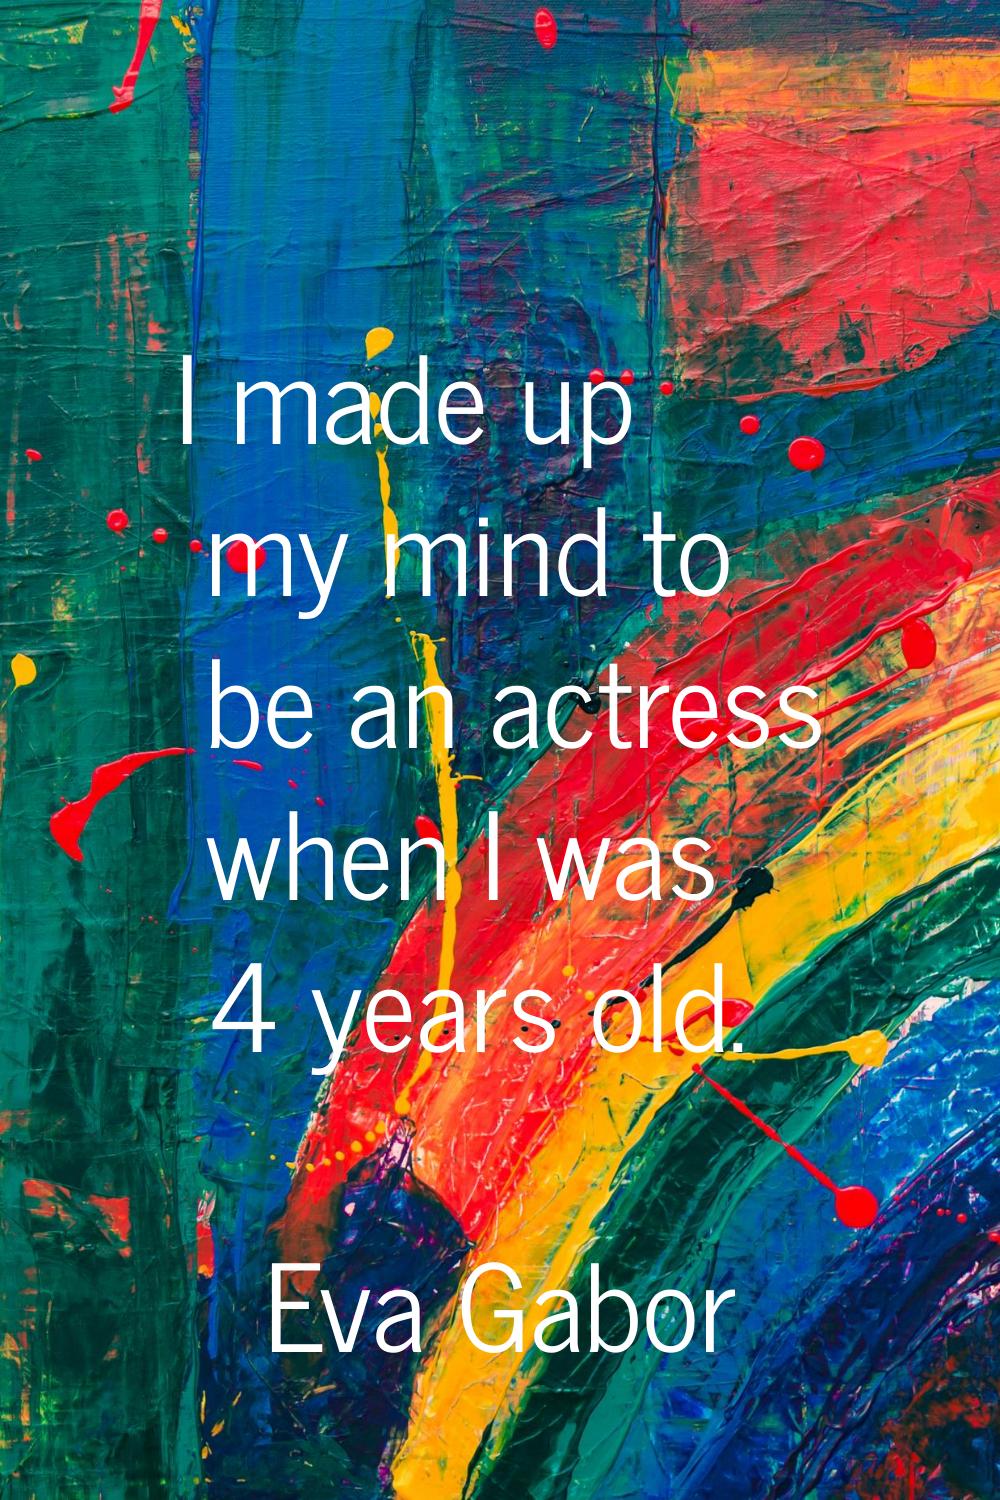 I made up my mind to be an actress when I was 4 years old.